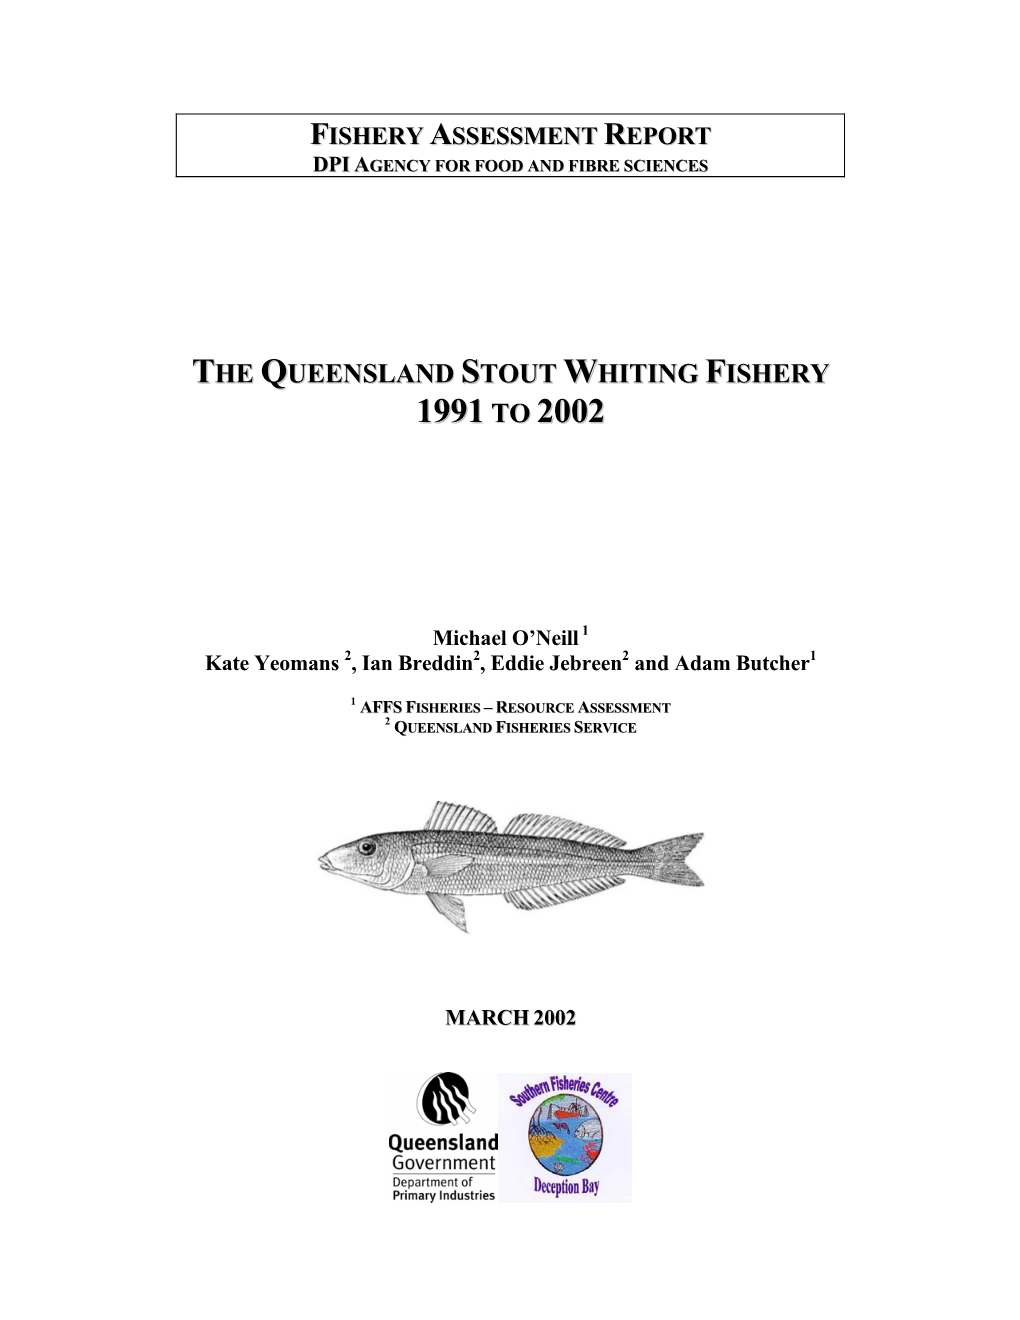 The Queensland Stout Whiting Fishery 1991 to 2002